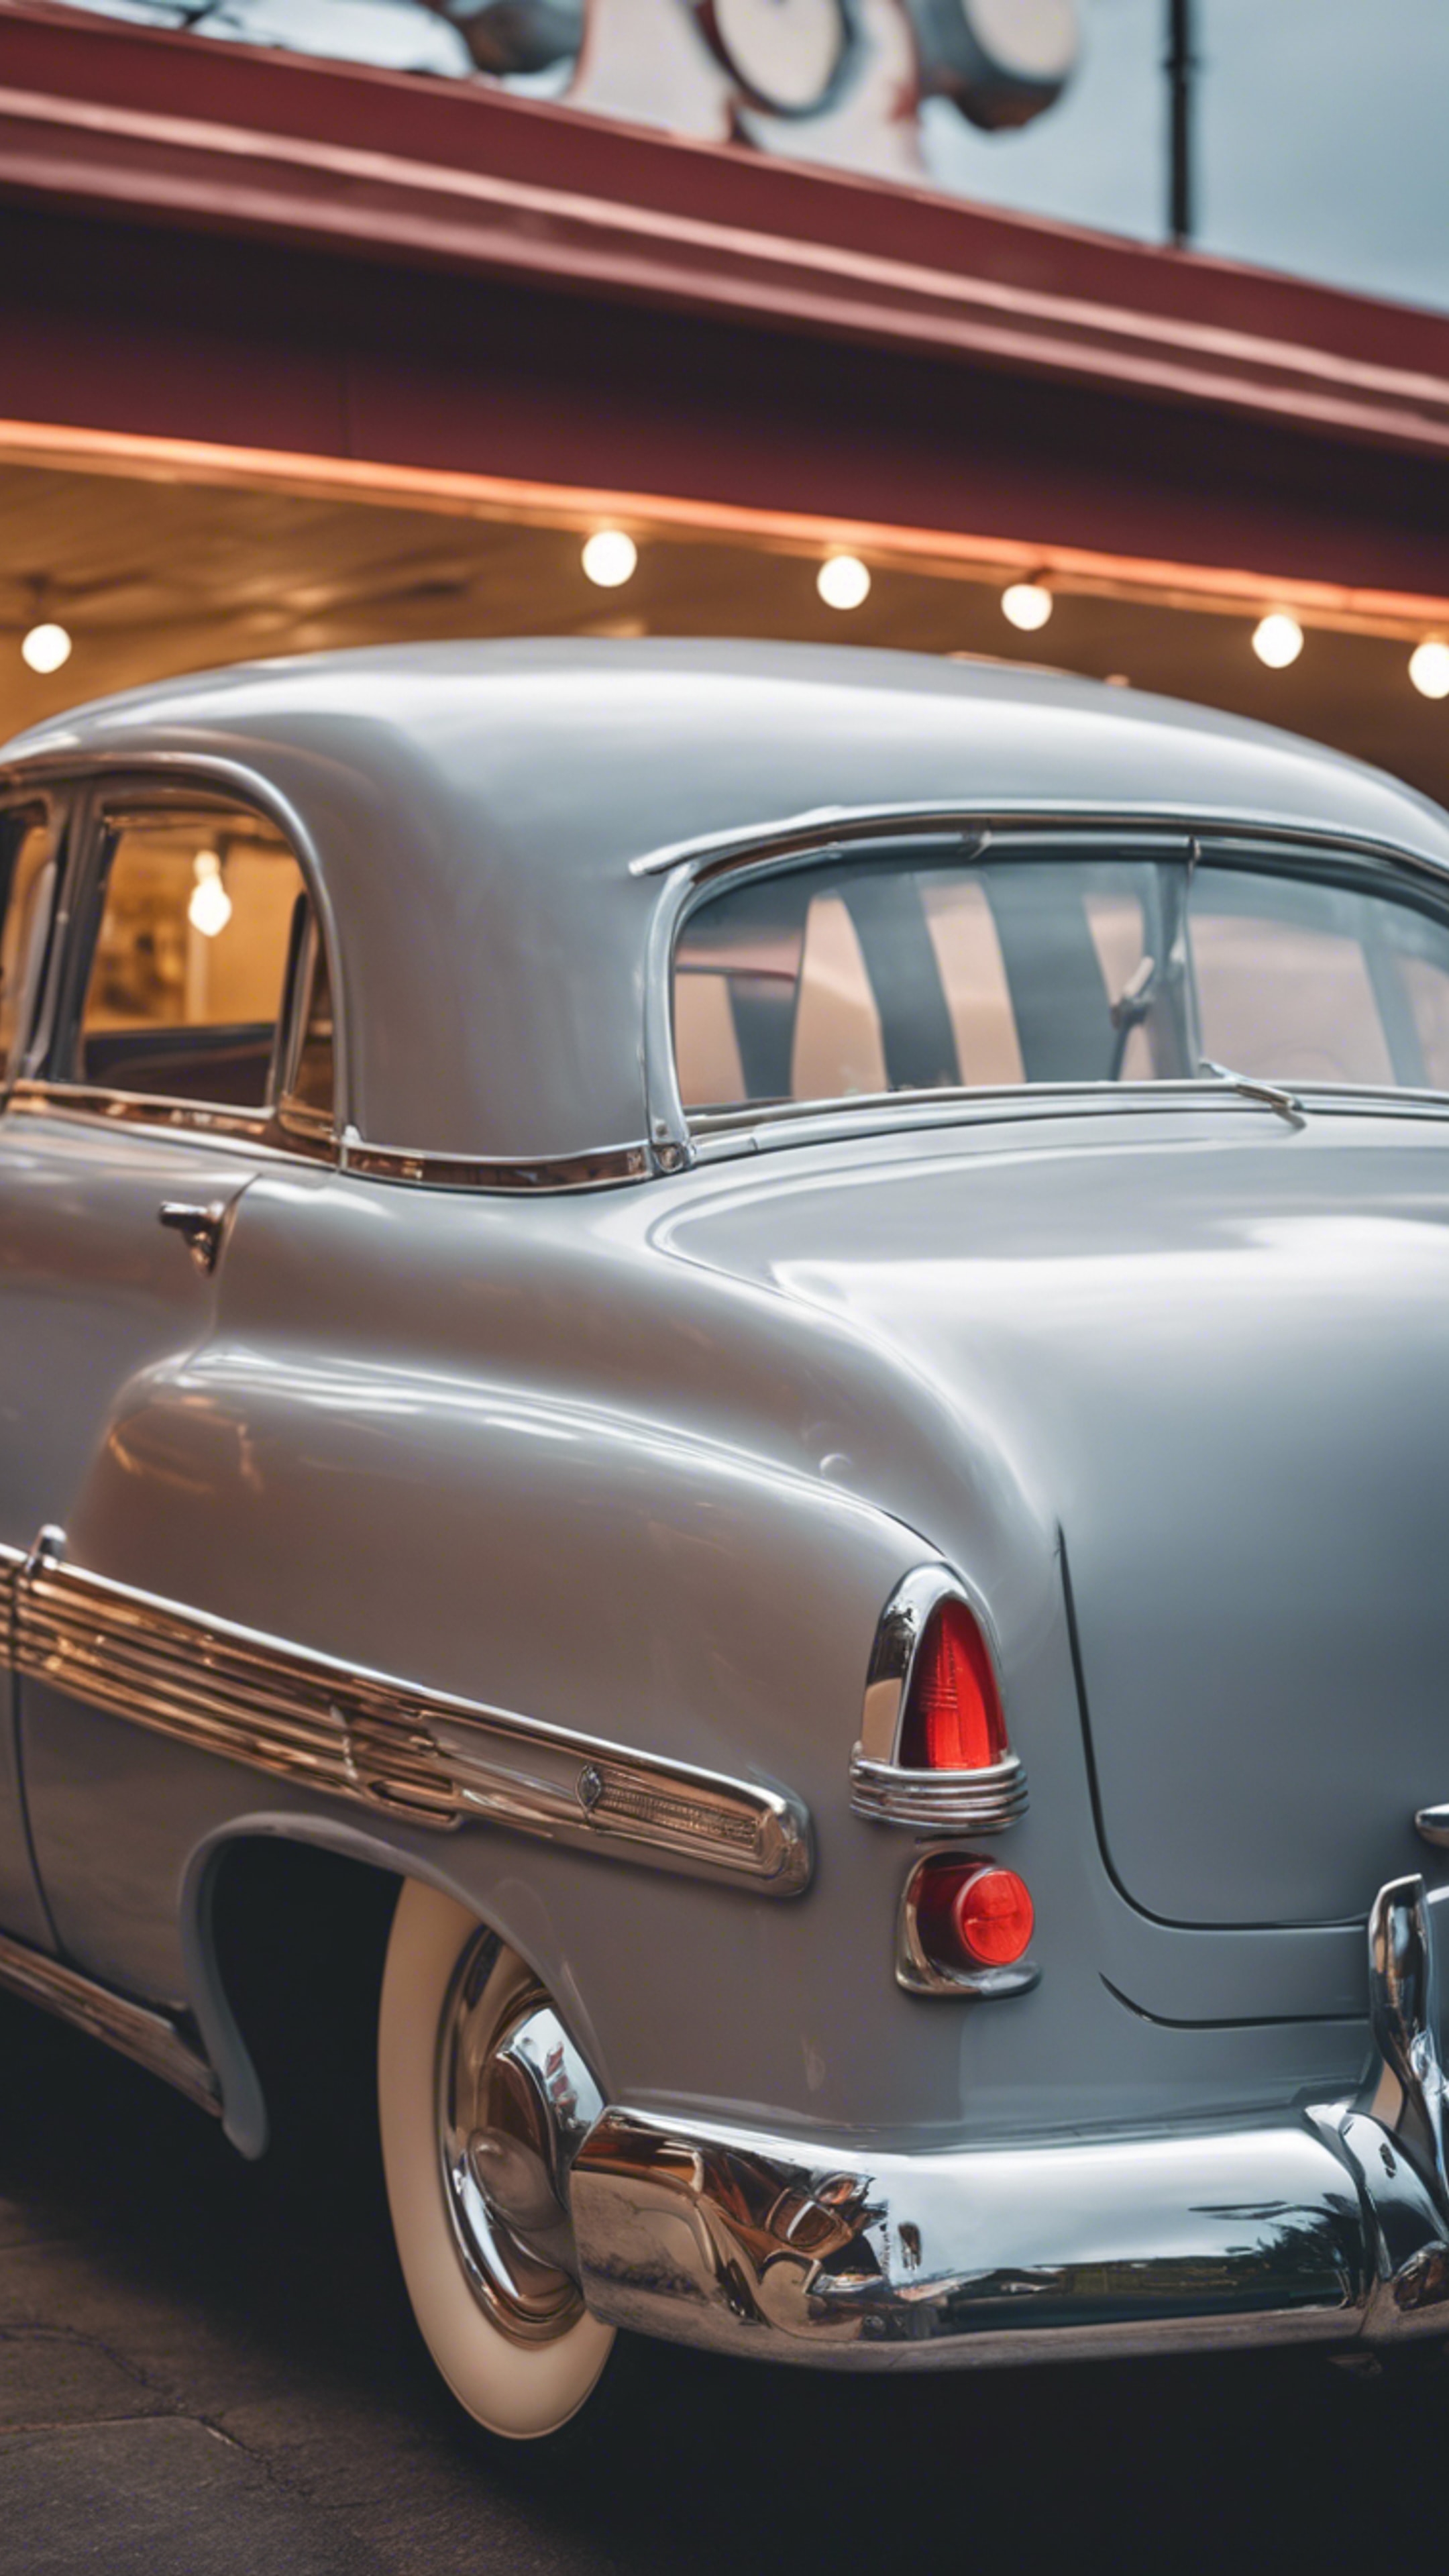 A vintage 1950s car, painted in light gray, parked outside a quirky roadside diner. Tapeta[6f1ad1f93eb7446a85d1]